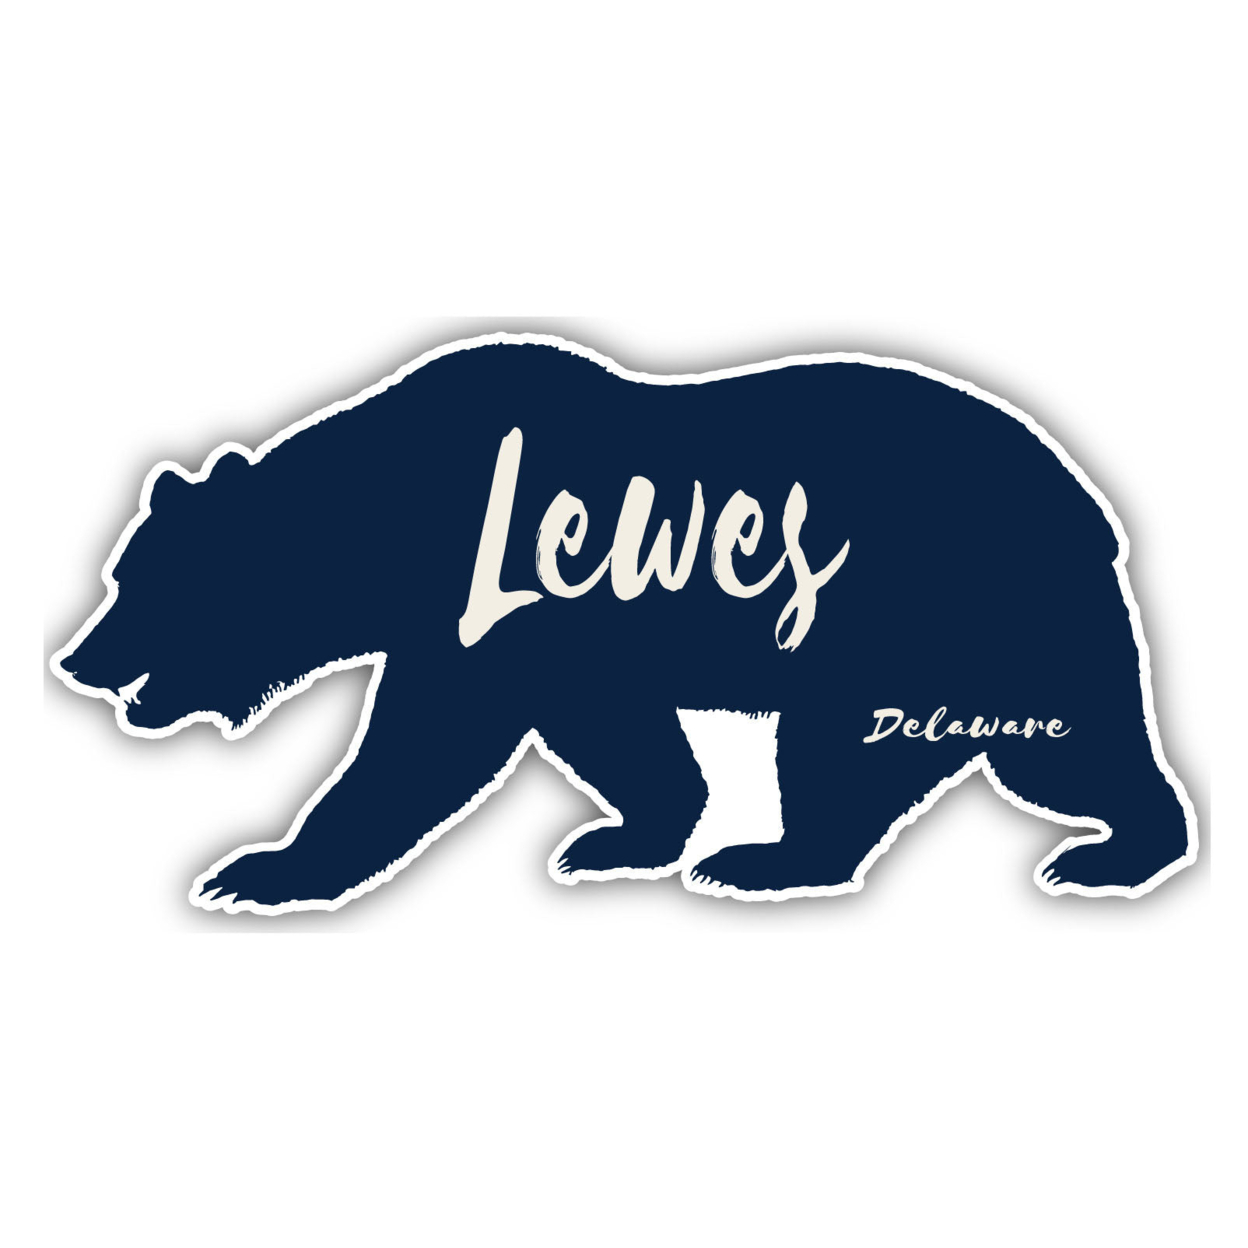 Lewes Delaware Souvenir Decorative Stickers (Choose Theme And Size) - 4-Inch, Bear